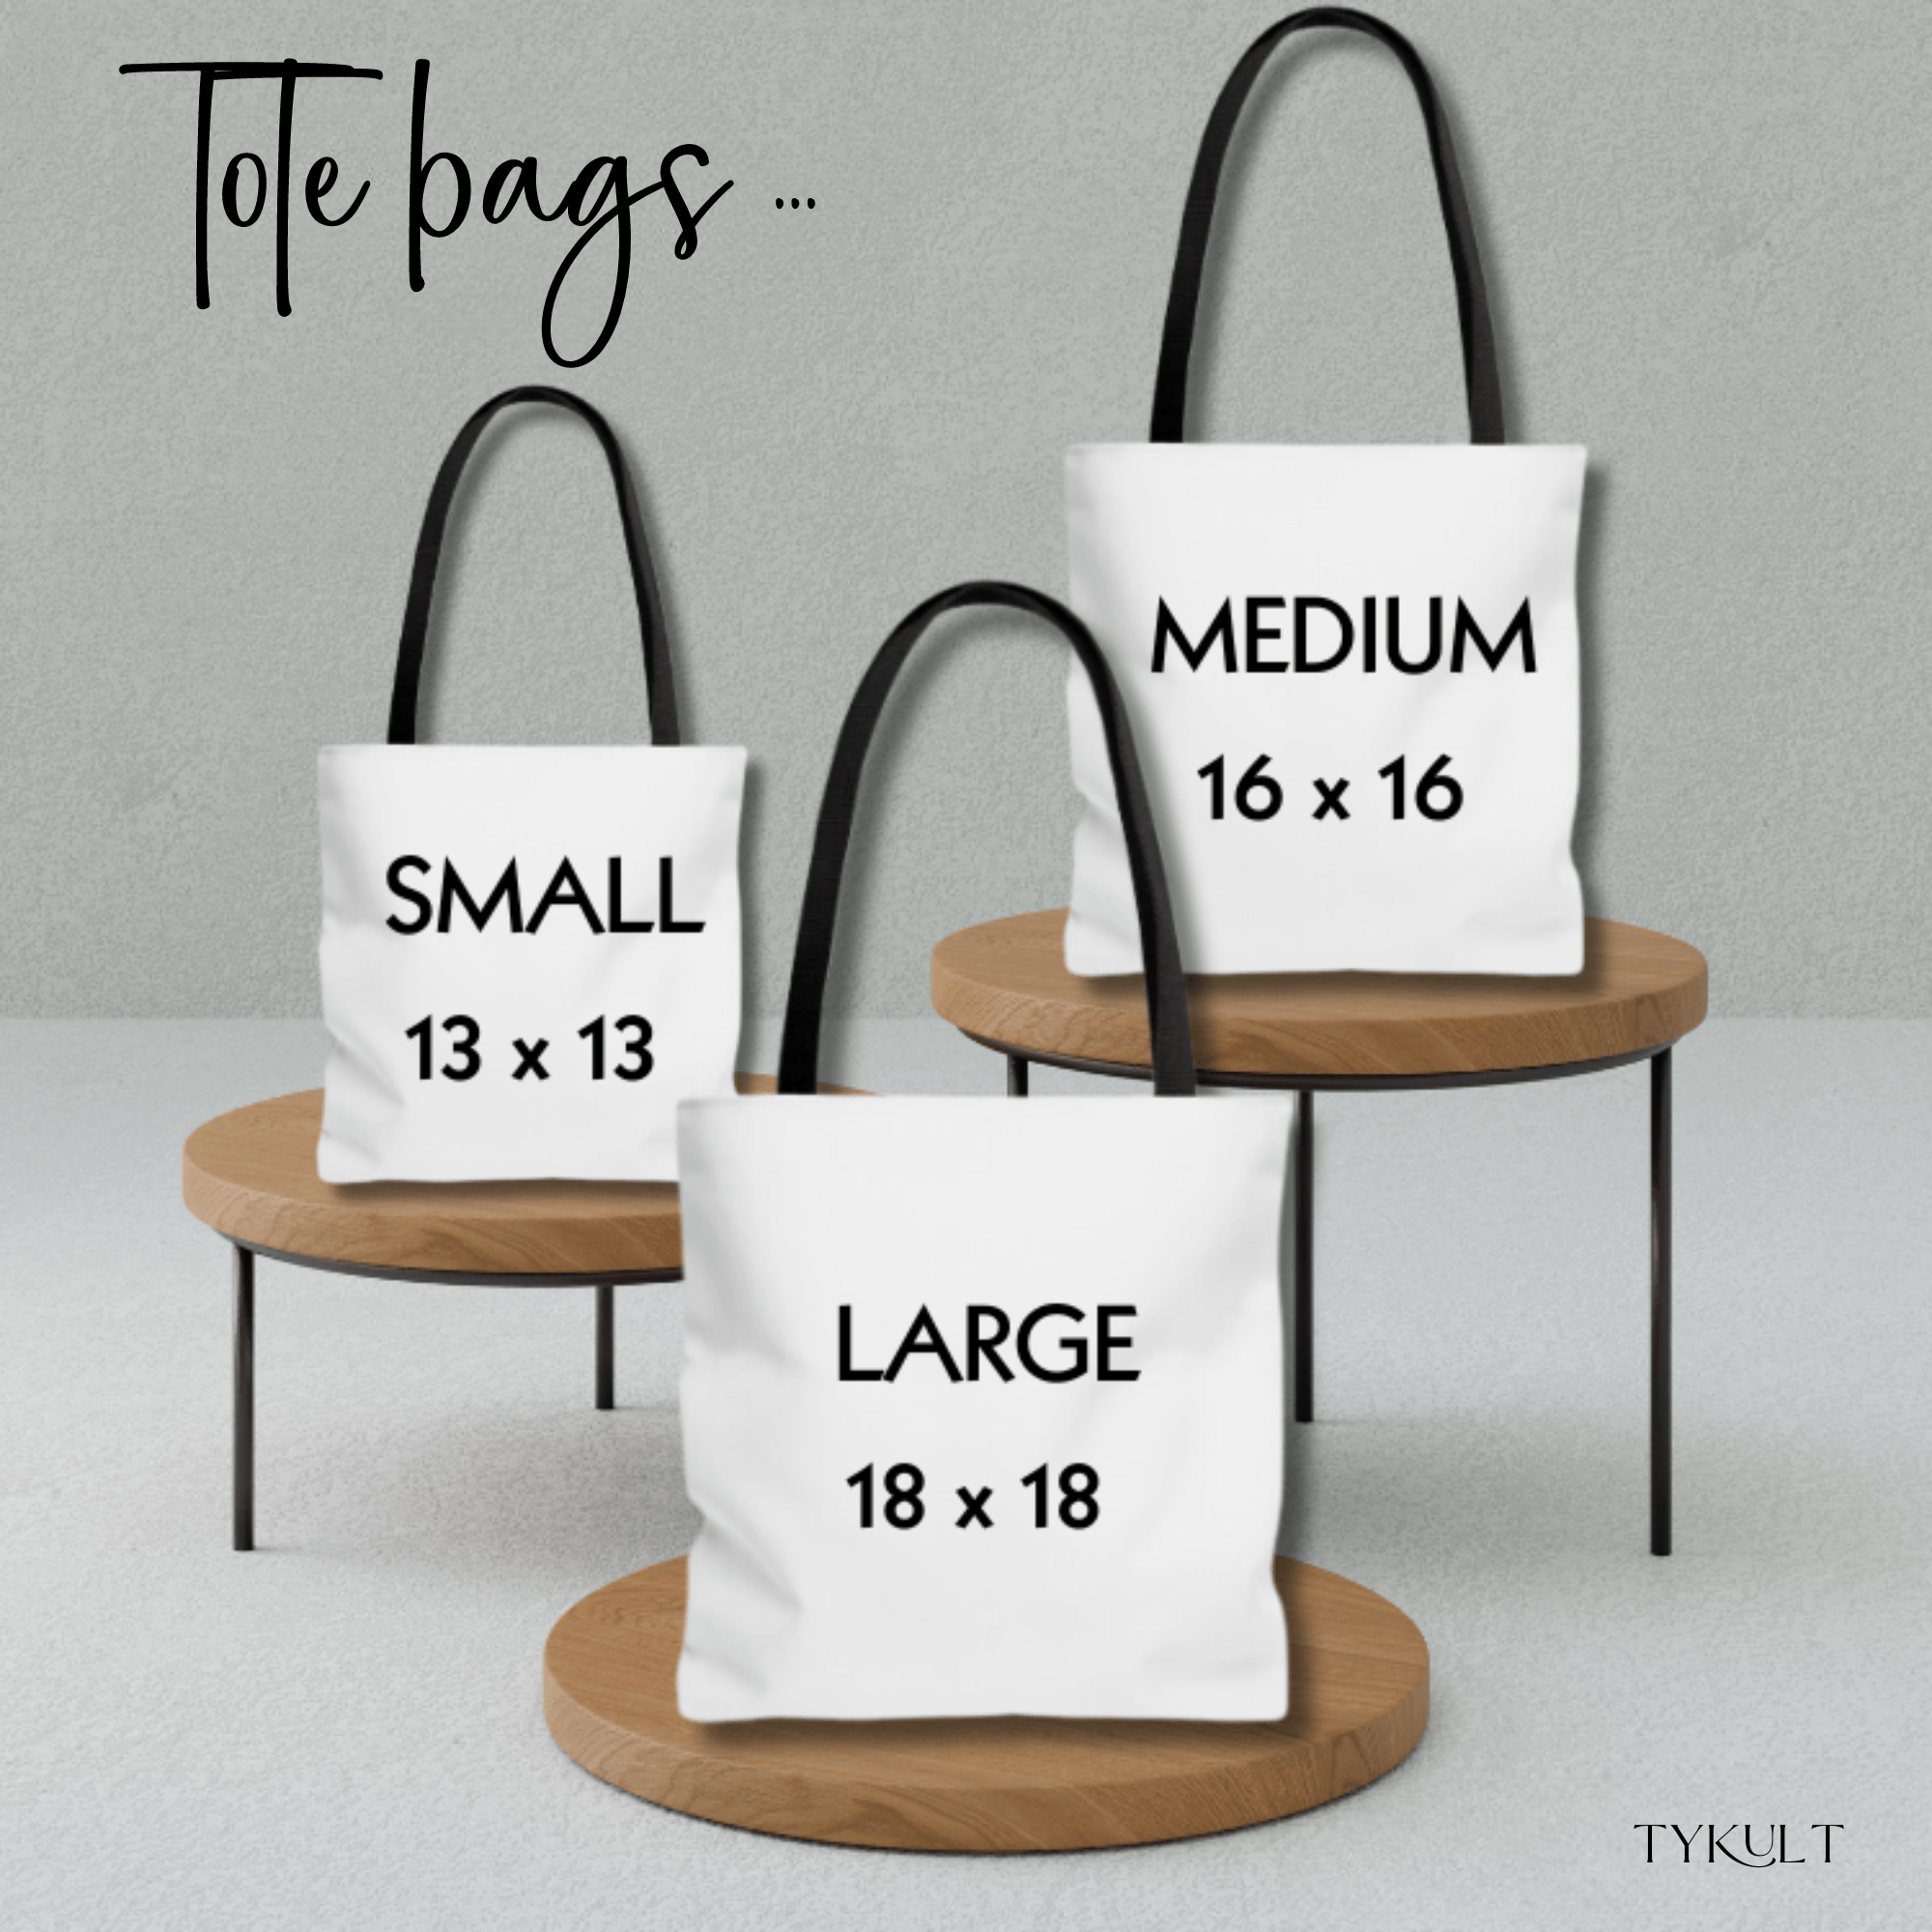 PERSONALIZABLE TOTE BAG | MONOGRAM - O | PERFECT GIFT for WIFE, MOTHER-in-LAW, YOU